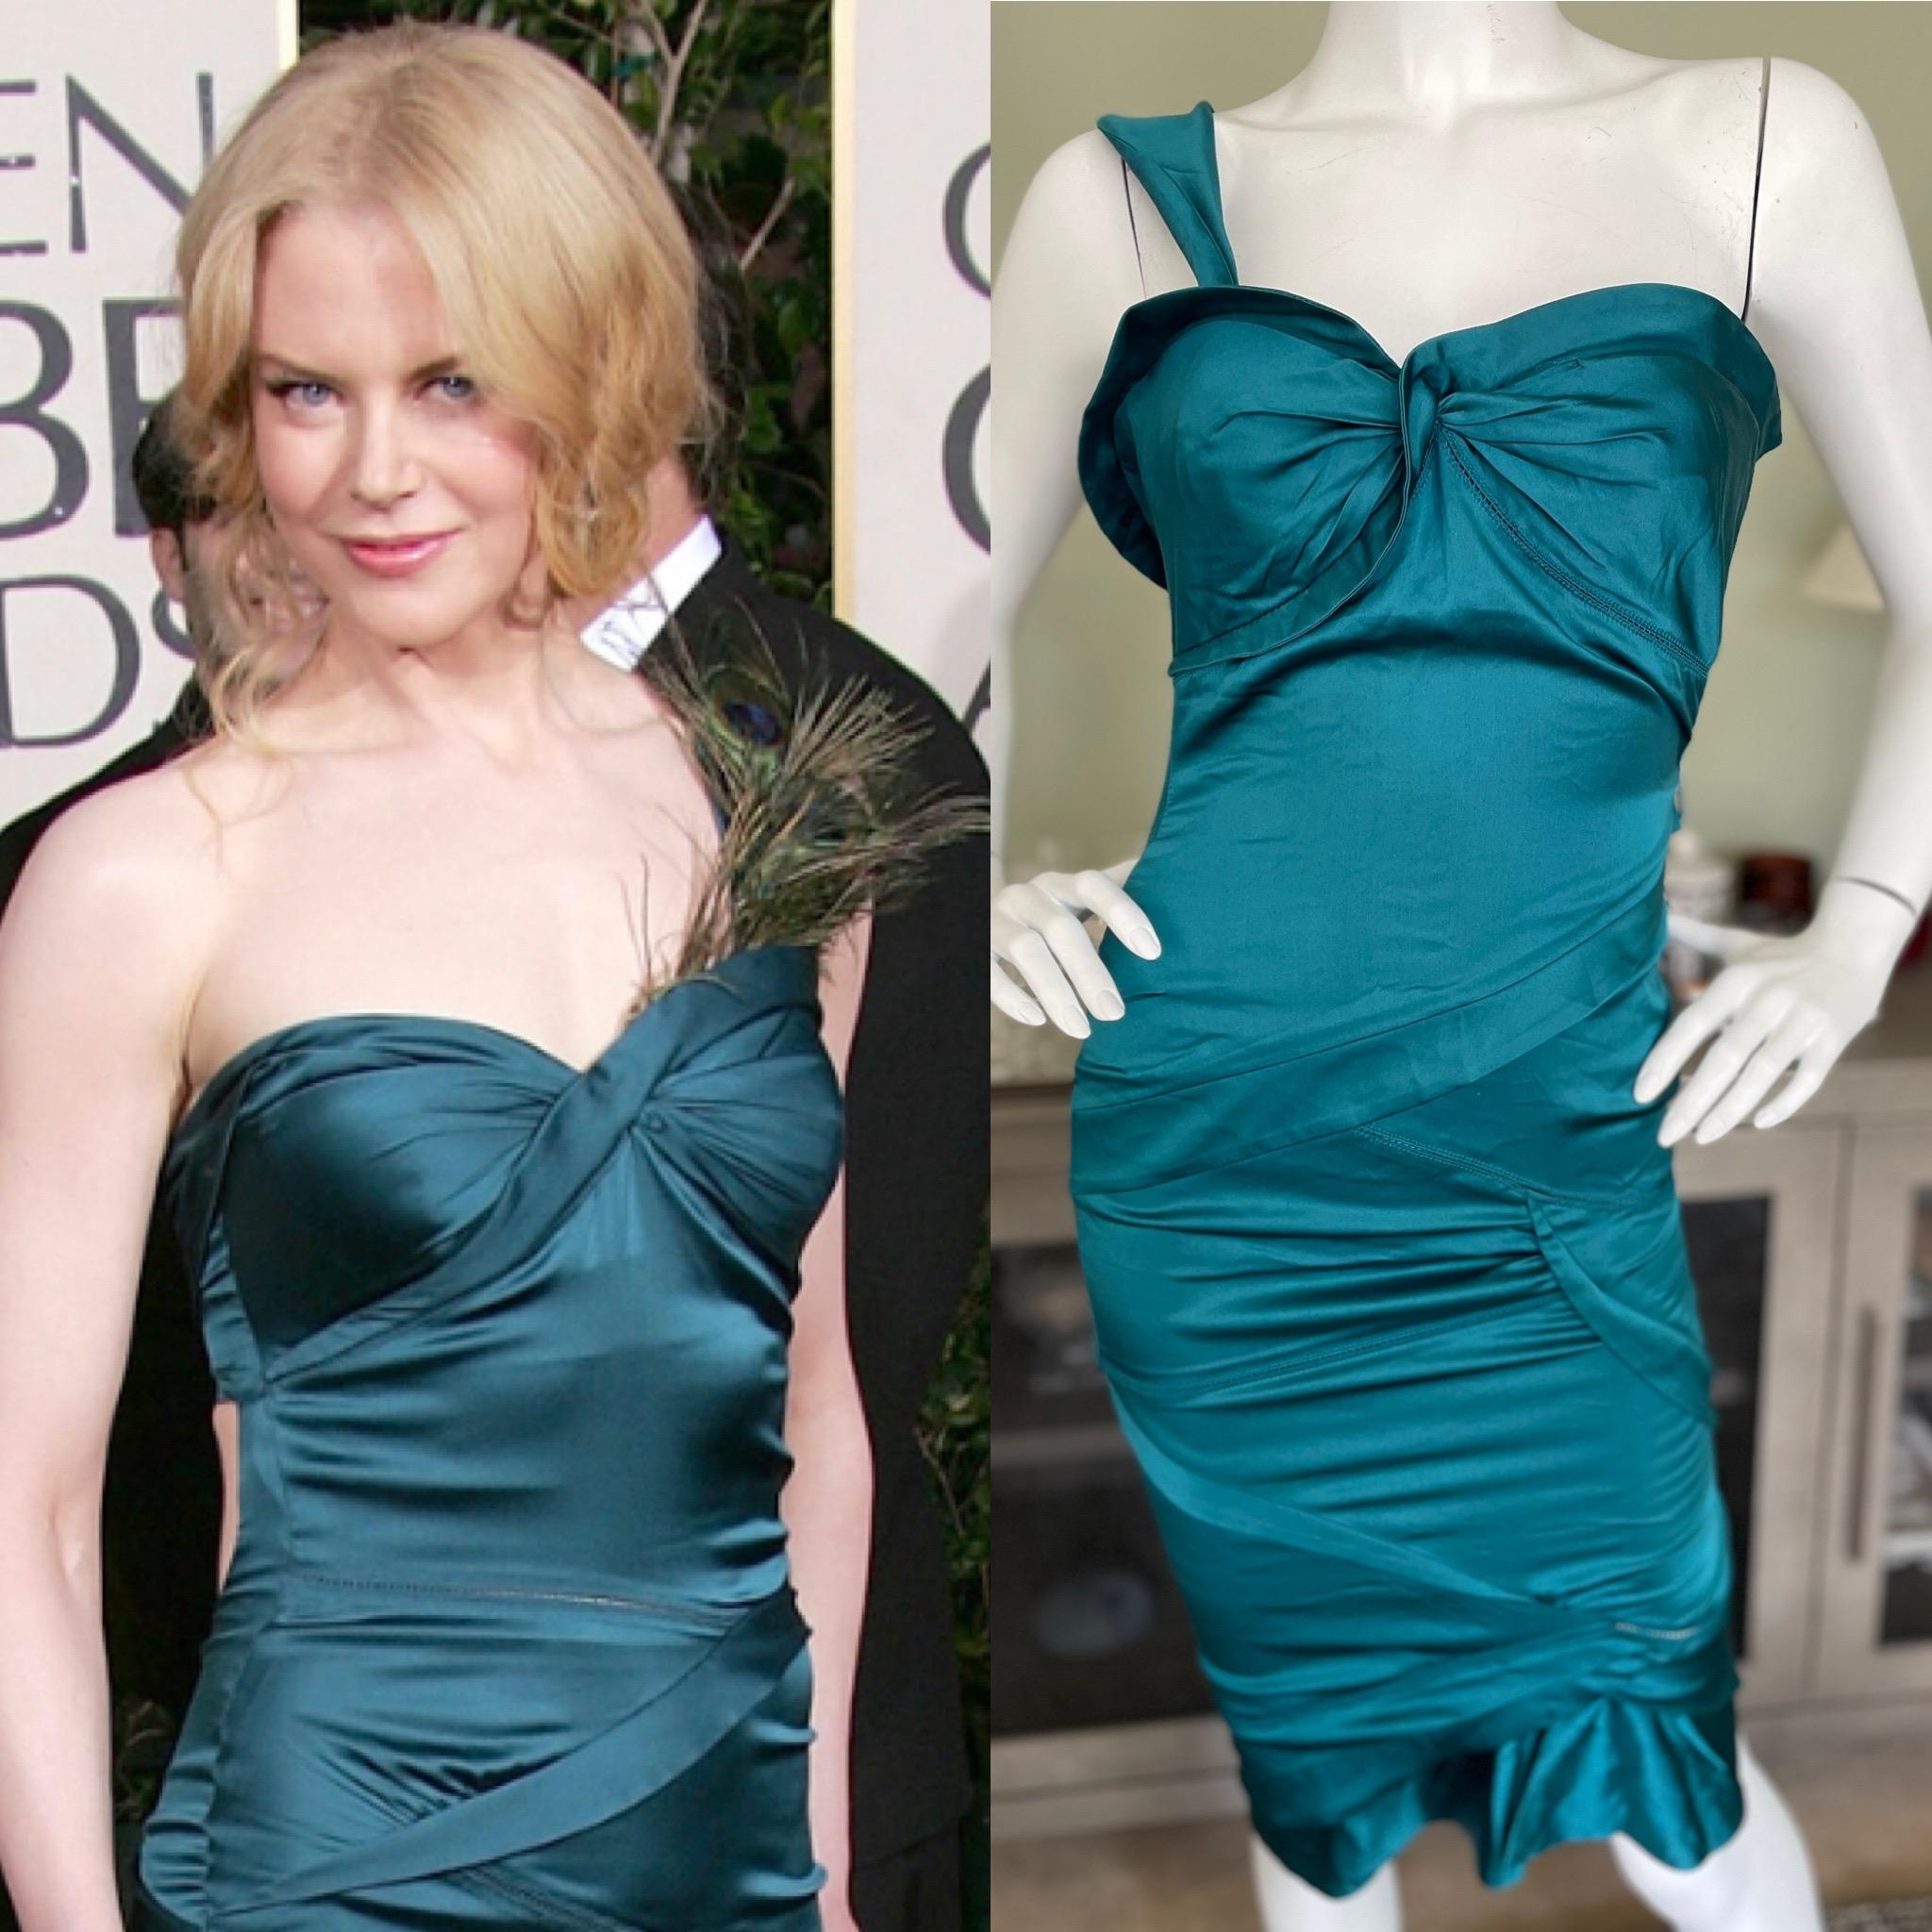 Gucci by Tom Ford Green Silk One Shoulder Cocktail Dress
The long version was worn by Nicole Kidman to the Golden Globes 2005.
Size 38, but it runs very small, more like 34.
Please check measurements
 Bust 30